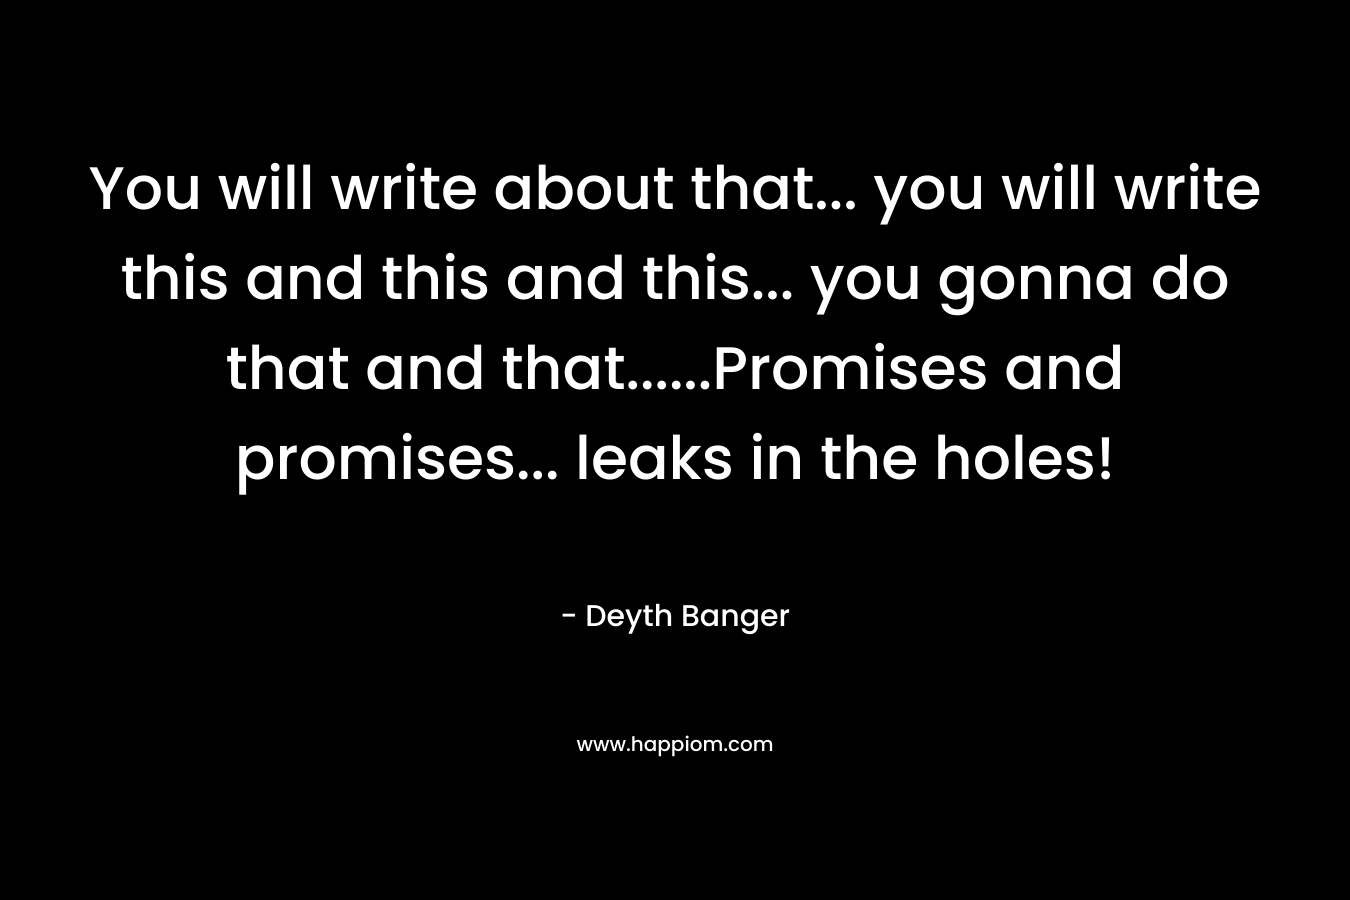 You will write about that... you will write this and this and this... you gonna do that and that......Promises and promises... leaks in the holes!